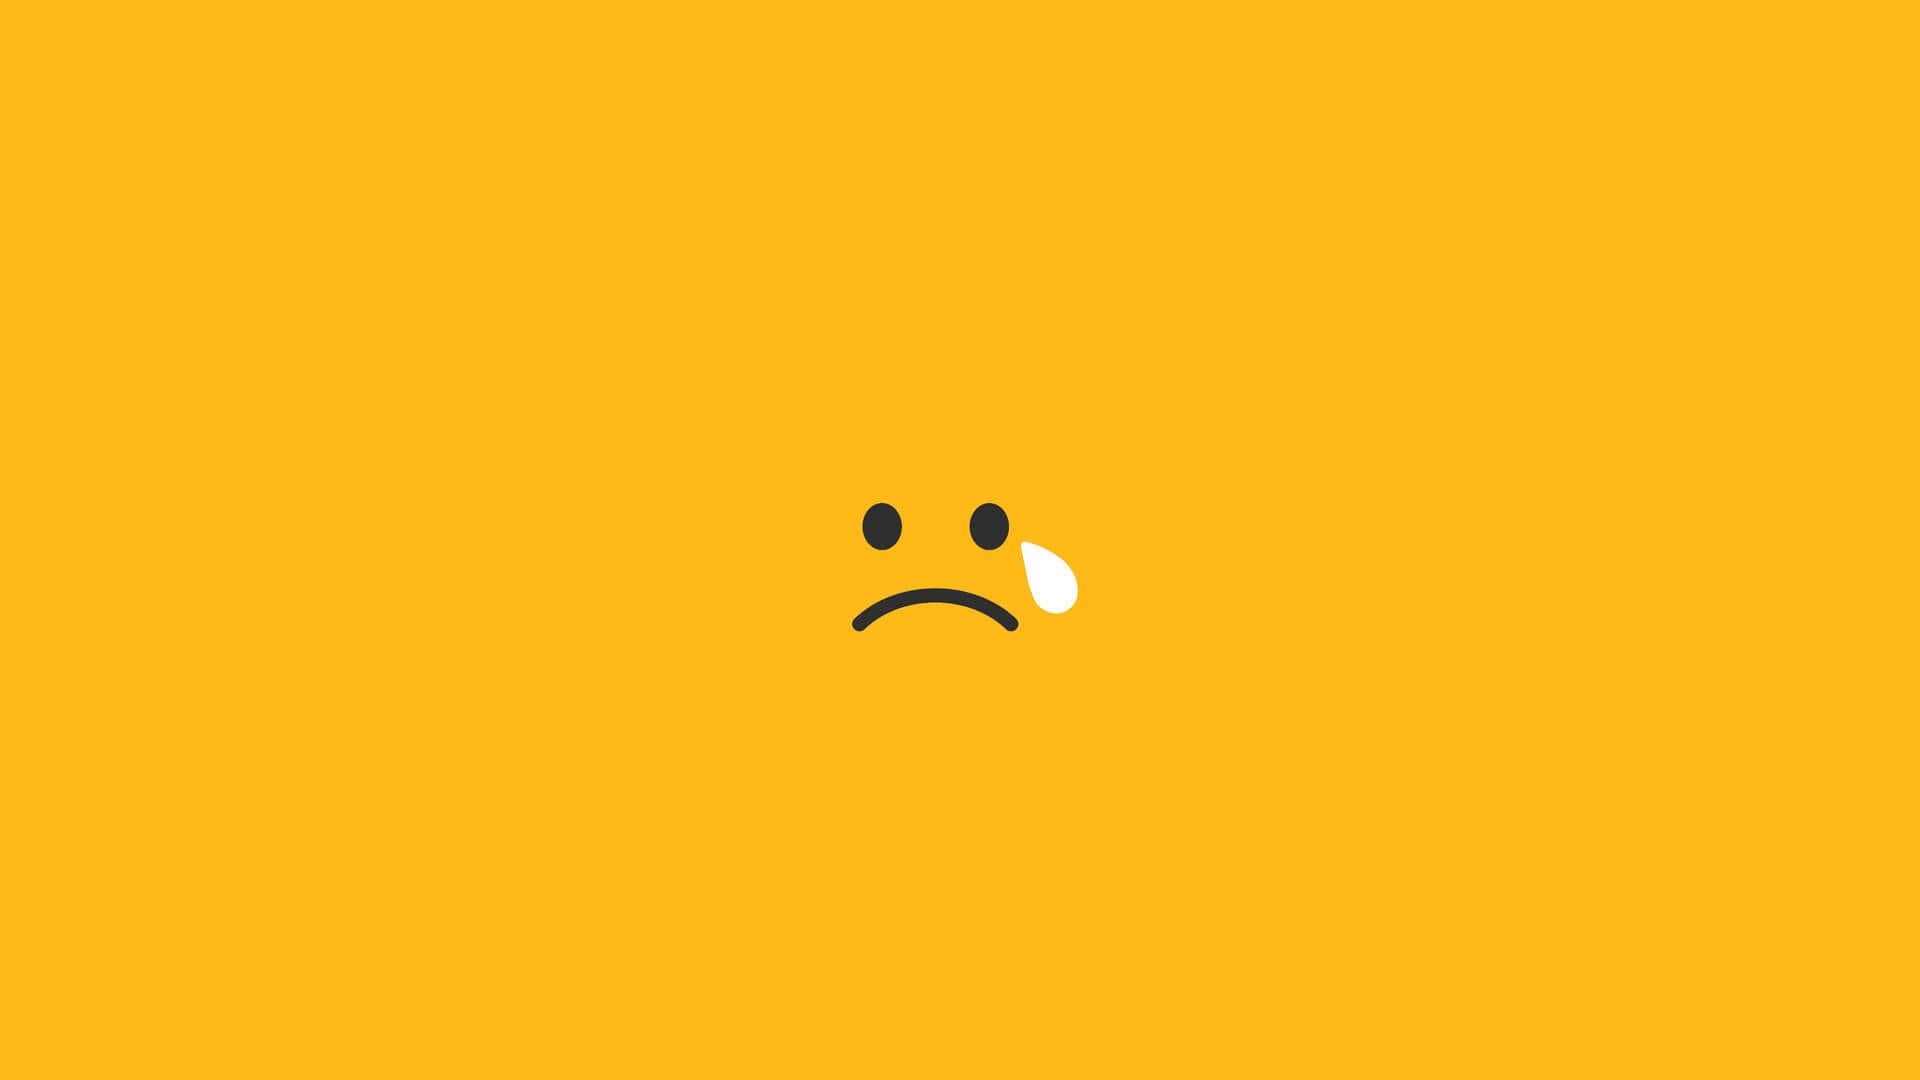 A Sad Face On A Yellow Background Wallpaper